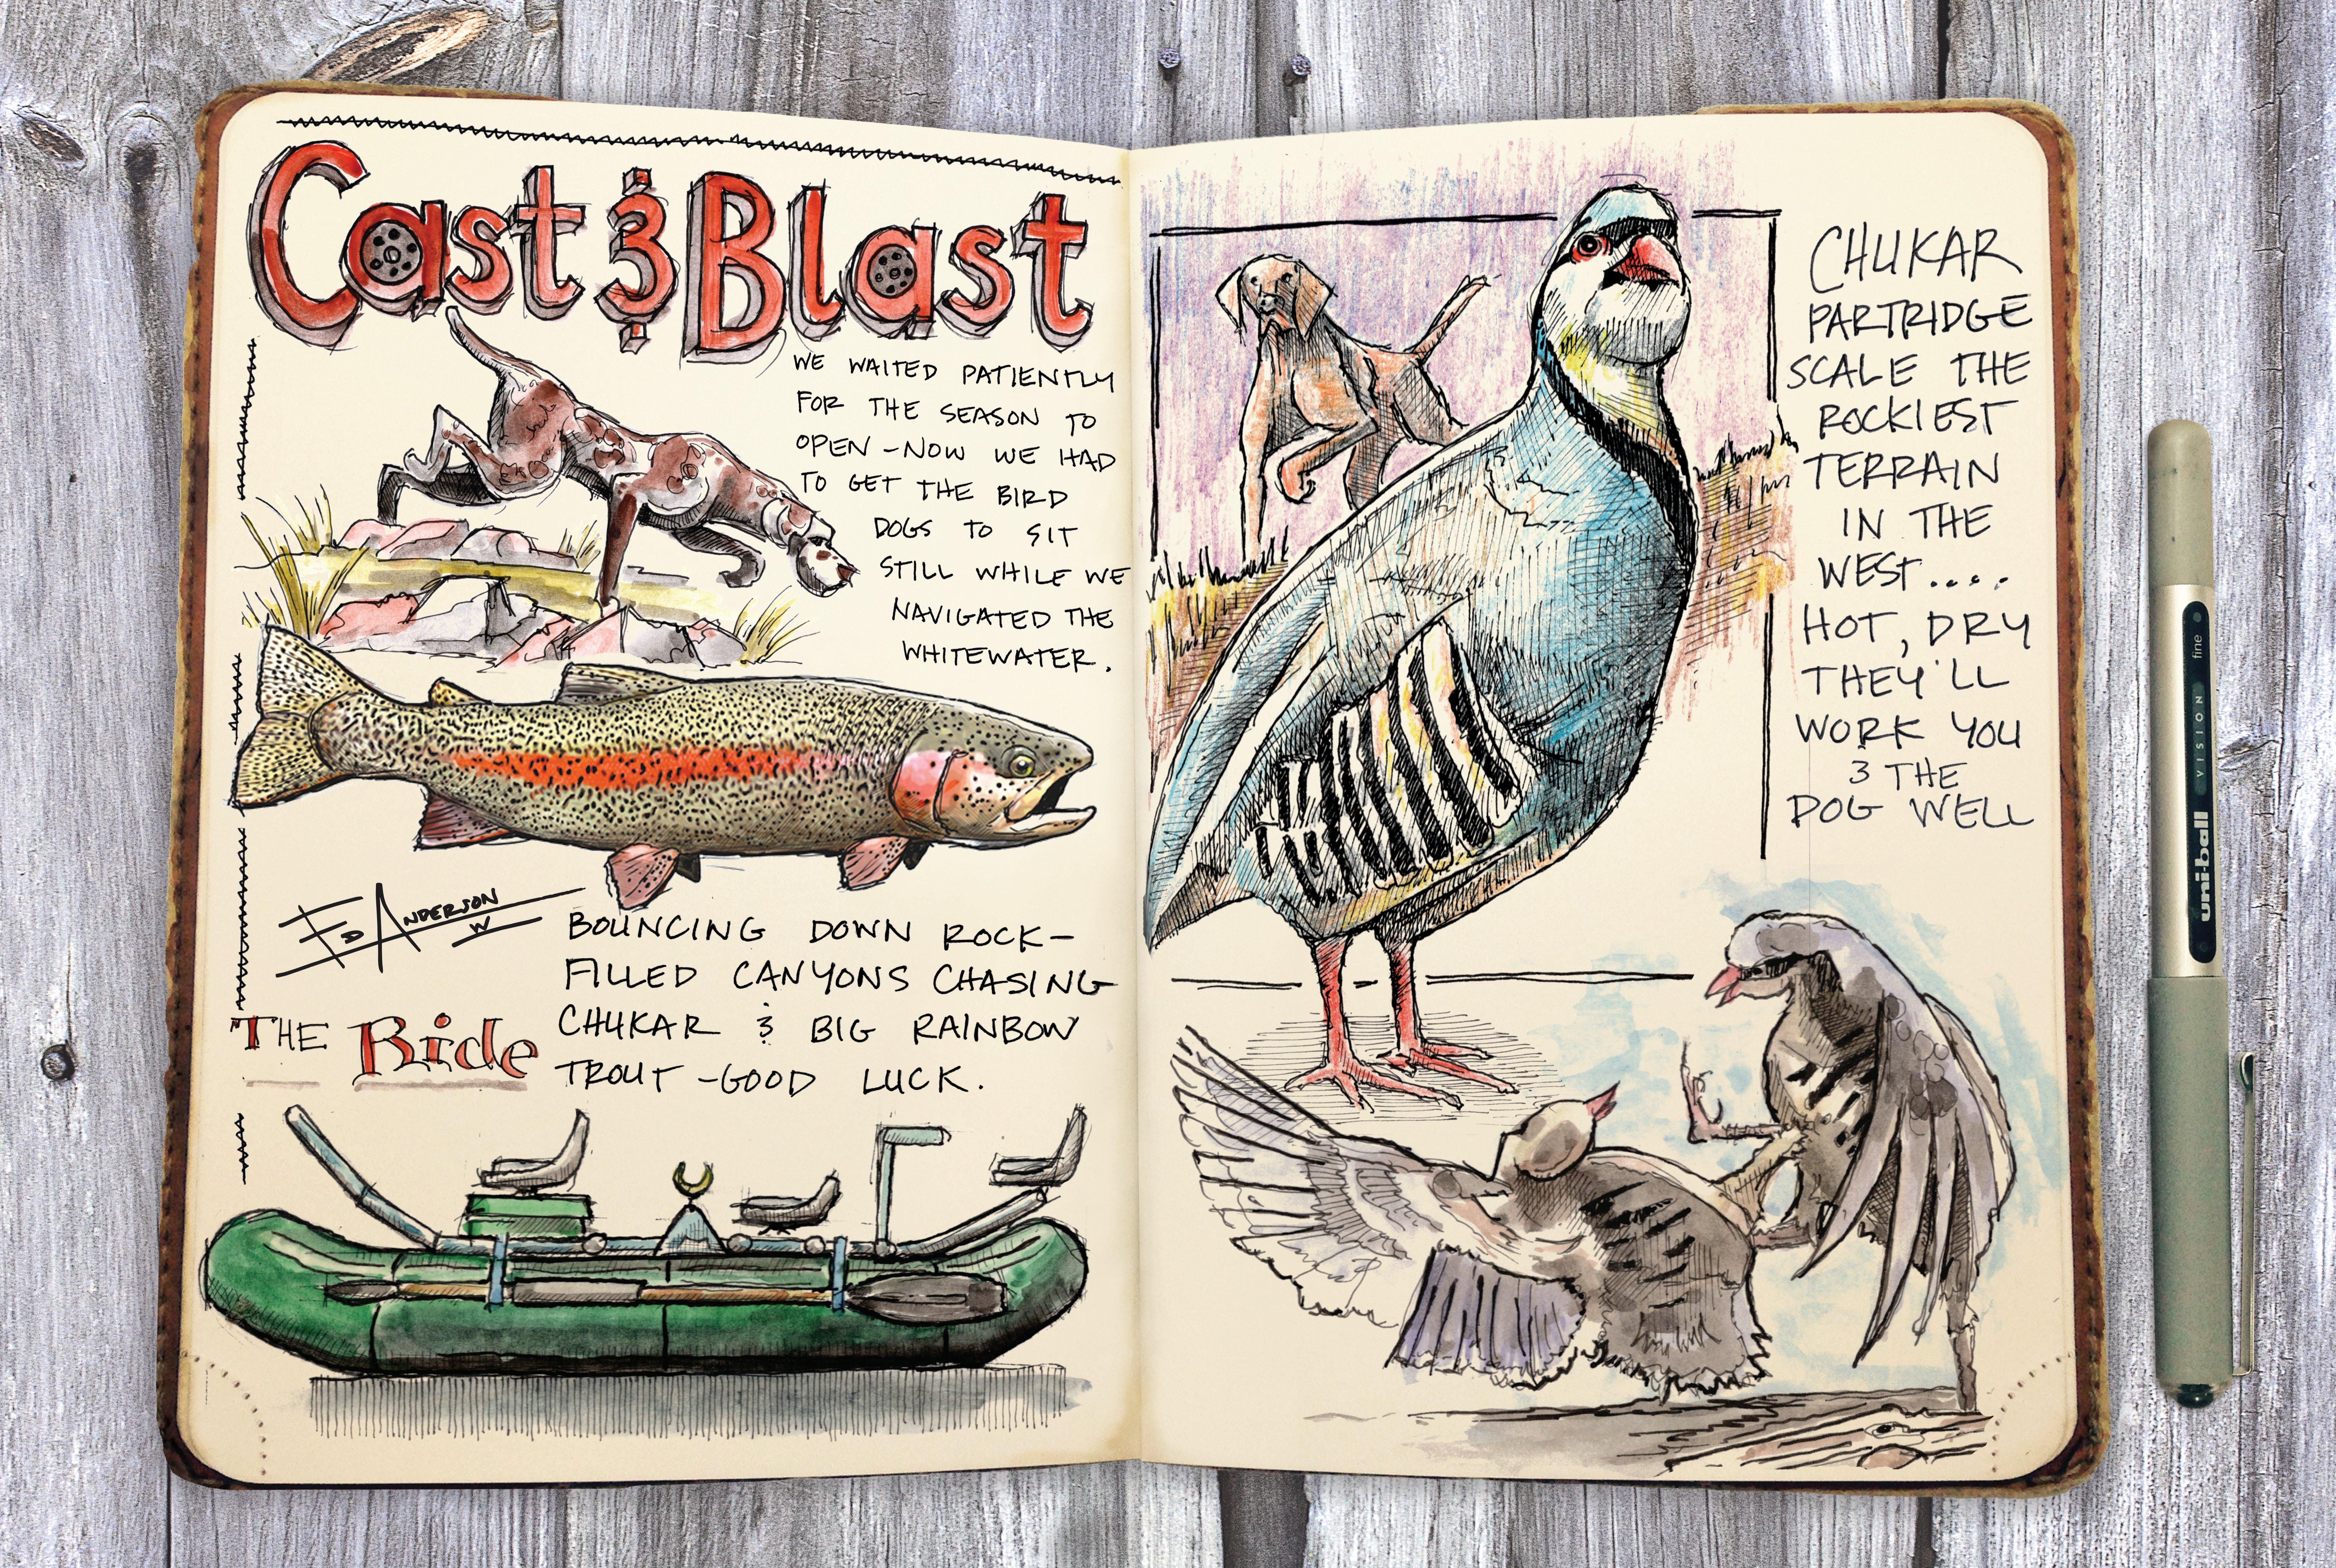 Ed Anderson's journals reflect his love of travel, hunting and fishing. (© Ed Anderson illustration)